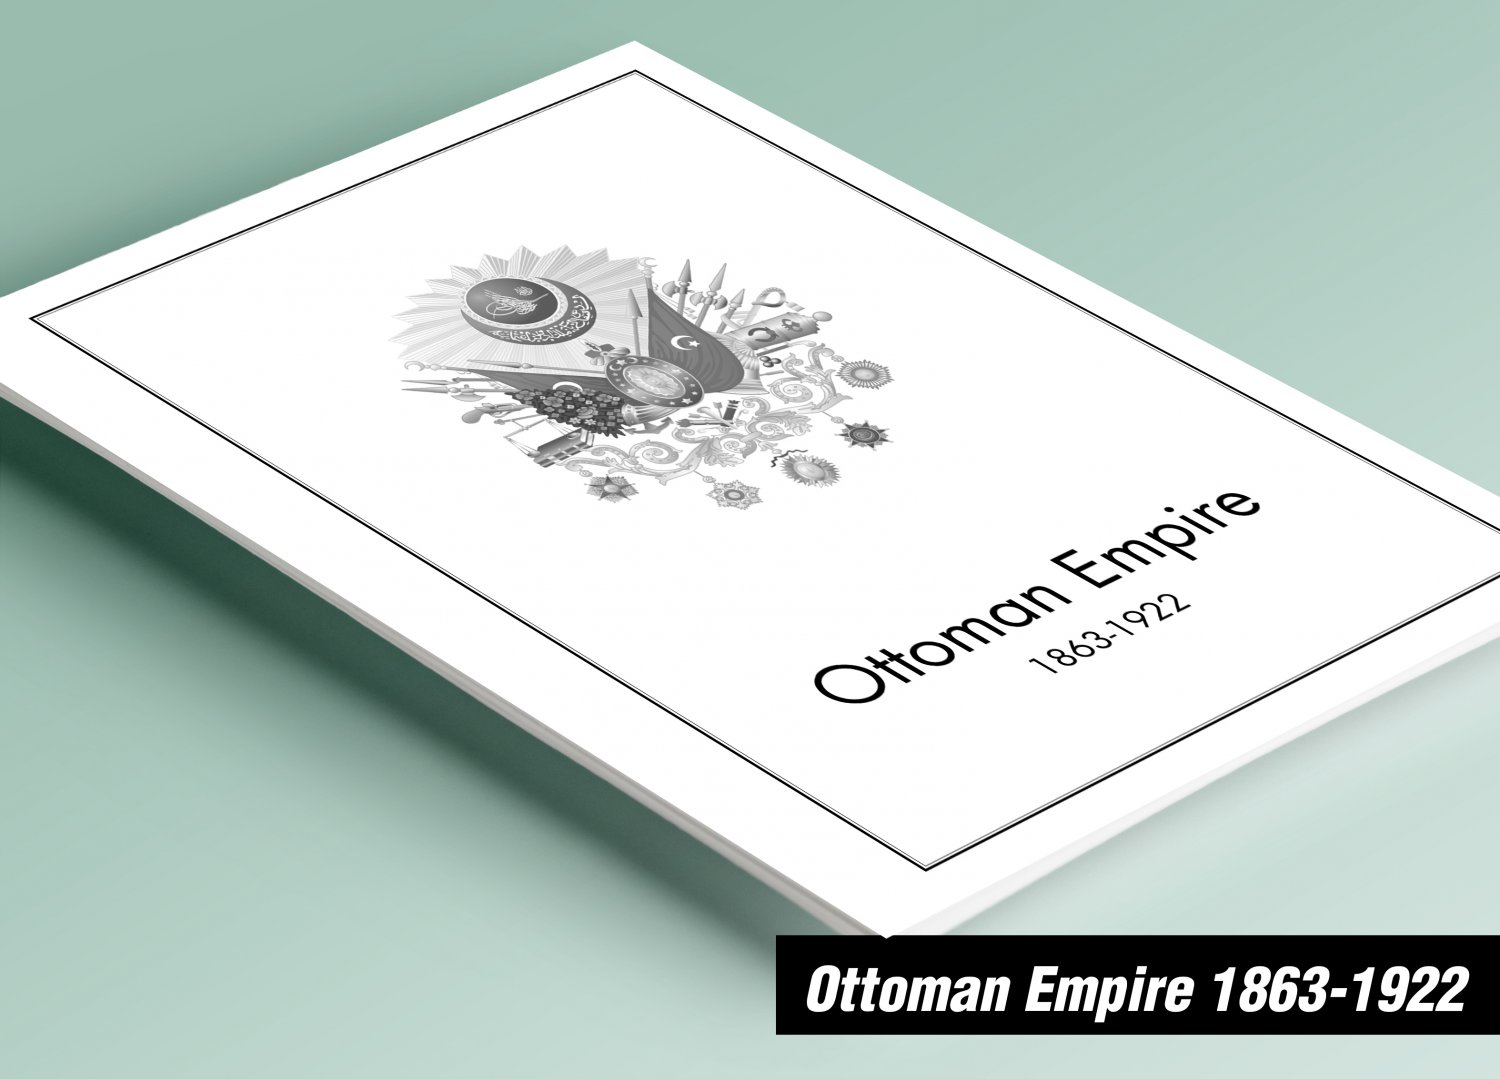 PRINTED OTTOMAN EMPIRE 1863-1922 STAMP ALBUM PAGES (65 pages)